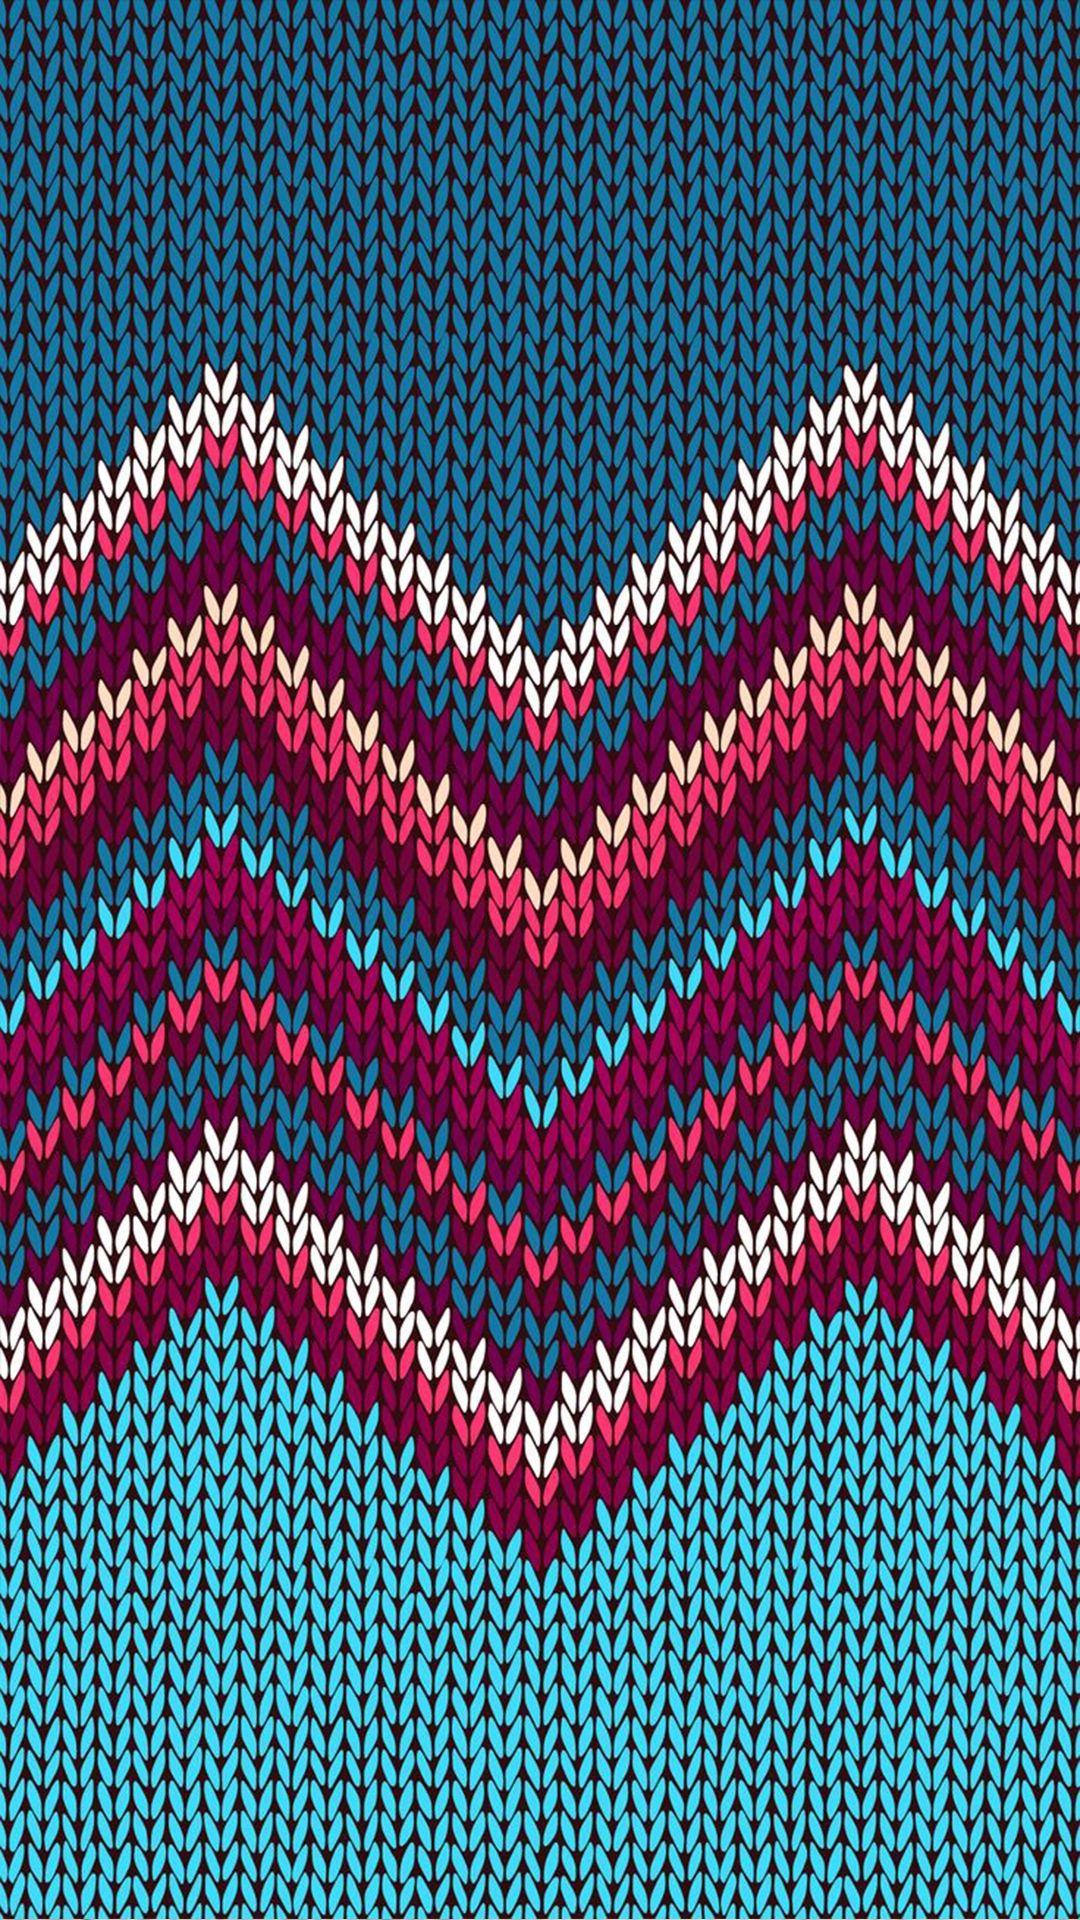 Knitted Pattern. Tap to see more Pattern & Texture iPhone